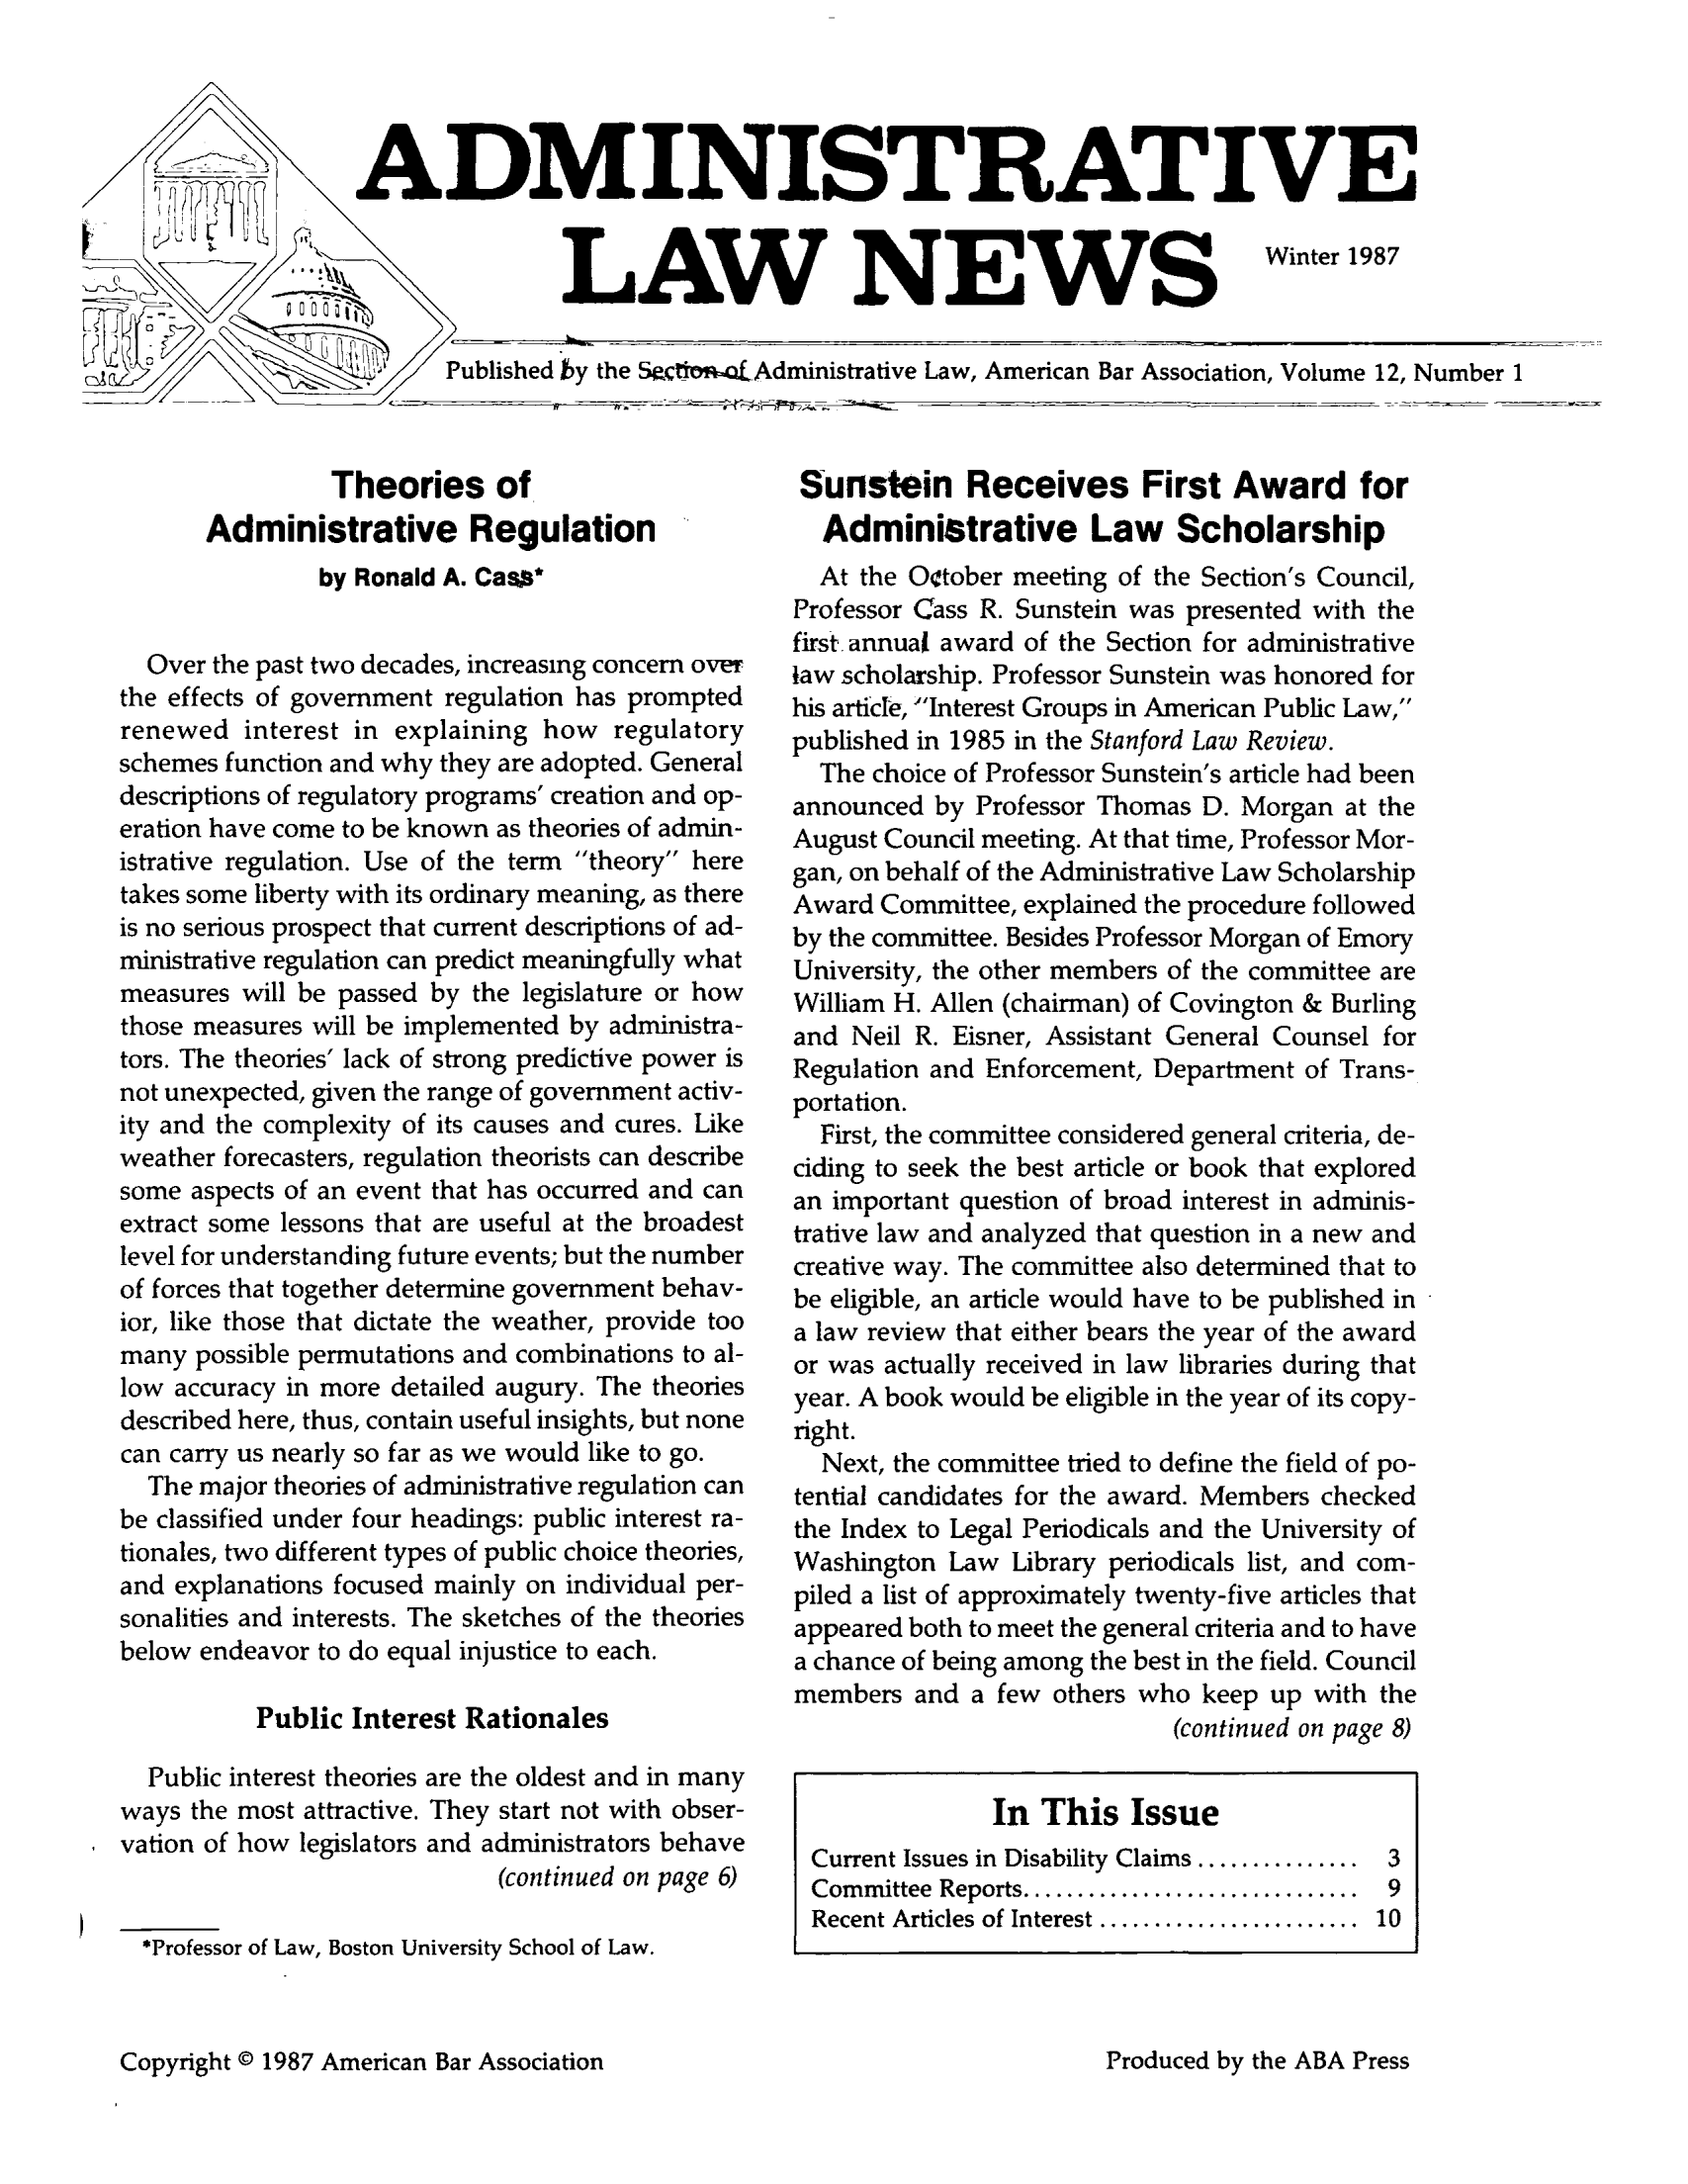 handle is hein.journals/admreln12 and id is 1 raw text is: ADMINISTRATIVE

LAW NEWS

Winter 1987

Published by the SactOn-otAdministrative Law, American Bar Association, Volume 12, Number 1

Theories of
Administrative Regulation
by Ronald A. Cas*
Over the past two decades, increasing concern over
the effects of government regulation has prompted
renewed interest in explaining how regulatory
schemes function and why they are adopted. General
descriptions of regulatory programs' creation and op-
eration have come to be known as theories of admin-
istrative regulation. Use of the term theory here
takes some liberty with its ordinary meaning, as there
is no serious prospect that current descriptions of ad-
ministrative regulation can predict meaningfully what
measures will be passed by the legislature or how
those measures will be implemented by administra-
tors. The theories lack of strong predictive power is
not unexpected, given the range of government activ-
ity and the complexity of its causes and cures. Like
weather forecasters, regulation theorists can describe
some aspects of an event that has occurred and can
extract some lessons that are useful at the broadest
level for understanding future events; but the number
of forces that together determine government behav-
ior, like those that dictate the weather, provide too
many possible permutations and combinations to al-
low accuracy in more detailed augury. The theories
described here, thus, contain useful insights, but none
can carry us nearly so far as we would like to go.
The major theories of administrative regulation can
be classified under four headings: public interest ra-
tionales, two different types of public choice theories,
and explanations focused mainly on individual per-
sonalities and interests. The sketches of the theories
below endeavor to do equal injustice to each.
Public Interest Rationales
Public interest theories are the oldest and in many
ways the most attractive. They start not with obser-
vation of how legislators and administrators behave
(continued on page 6)
*Professor of Law, Boston University School of Law.

Sunstein Receives First Award for
Administrative Law Scholarship
At the October meeting of the Section's Council,
Professor Cass R. Sunstein was presented with the
first annual award of the Section for administrative
law scholarship. Professor Sunstein was honored for
his article, Interest Groups in American Public Law,
published in 1985 in the Stanford Law Review.
The choice of Professor Sunstein's article had been
announced by Professor Thomas D. Morgan at the
August Council meeting. At that time, Professor Mor-
gan, on behalf of the Administrative Law Scholarship
Award Committee, explained the procedure followed
by the committee. Besides Professor Morgan of Emory
University, the other members of the committee are
William H. Allen (chairman) of Covington & Burling
and Neil R. Eisner, Assistant General Counsel for
Regulation and Enforcement, Department of Trans-
portation.
First, the committee considered general criteria, de-
ciding to seek the best article or book that explored
an important question of broad interest in adminis-
trative law and analyzed that question in a new and
creative way. The committee also determined that to
be eligible, an article would have to be published in
a law review that either bears the year of the award
or was actually received in law libraries during that
year. A book would be eligible in the year of its copy-
right.
Next, the committee tried to define the field of po-
tential candidates for the award. Members checked
the Index to Legal Periodicals and the University of
Washington Law Library periodicals list, and com-
piled a list of approximately twenty-five articles that
appeared both to meet the general criteria and to have
a chance of being among the best in the field. Council
members and a few others who keep up with the
(continued on page 8)
In This Issue
Current Issues in Disability Claims ............... 3
Committee  Reports ...............................  9
Recent Articles of Interest ........................  10

Copyright © 1987 American Bar Association

Produced by the ABA Press


